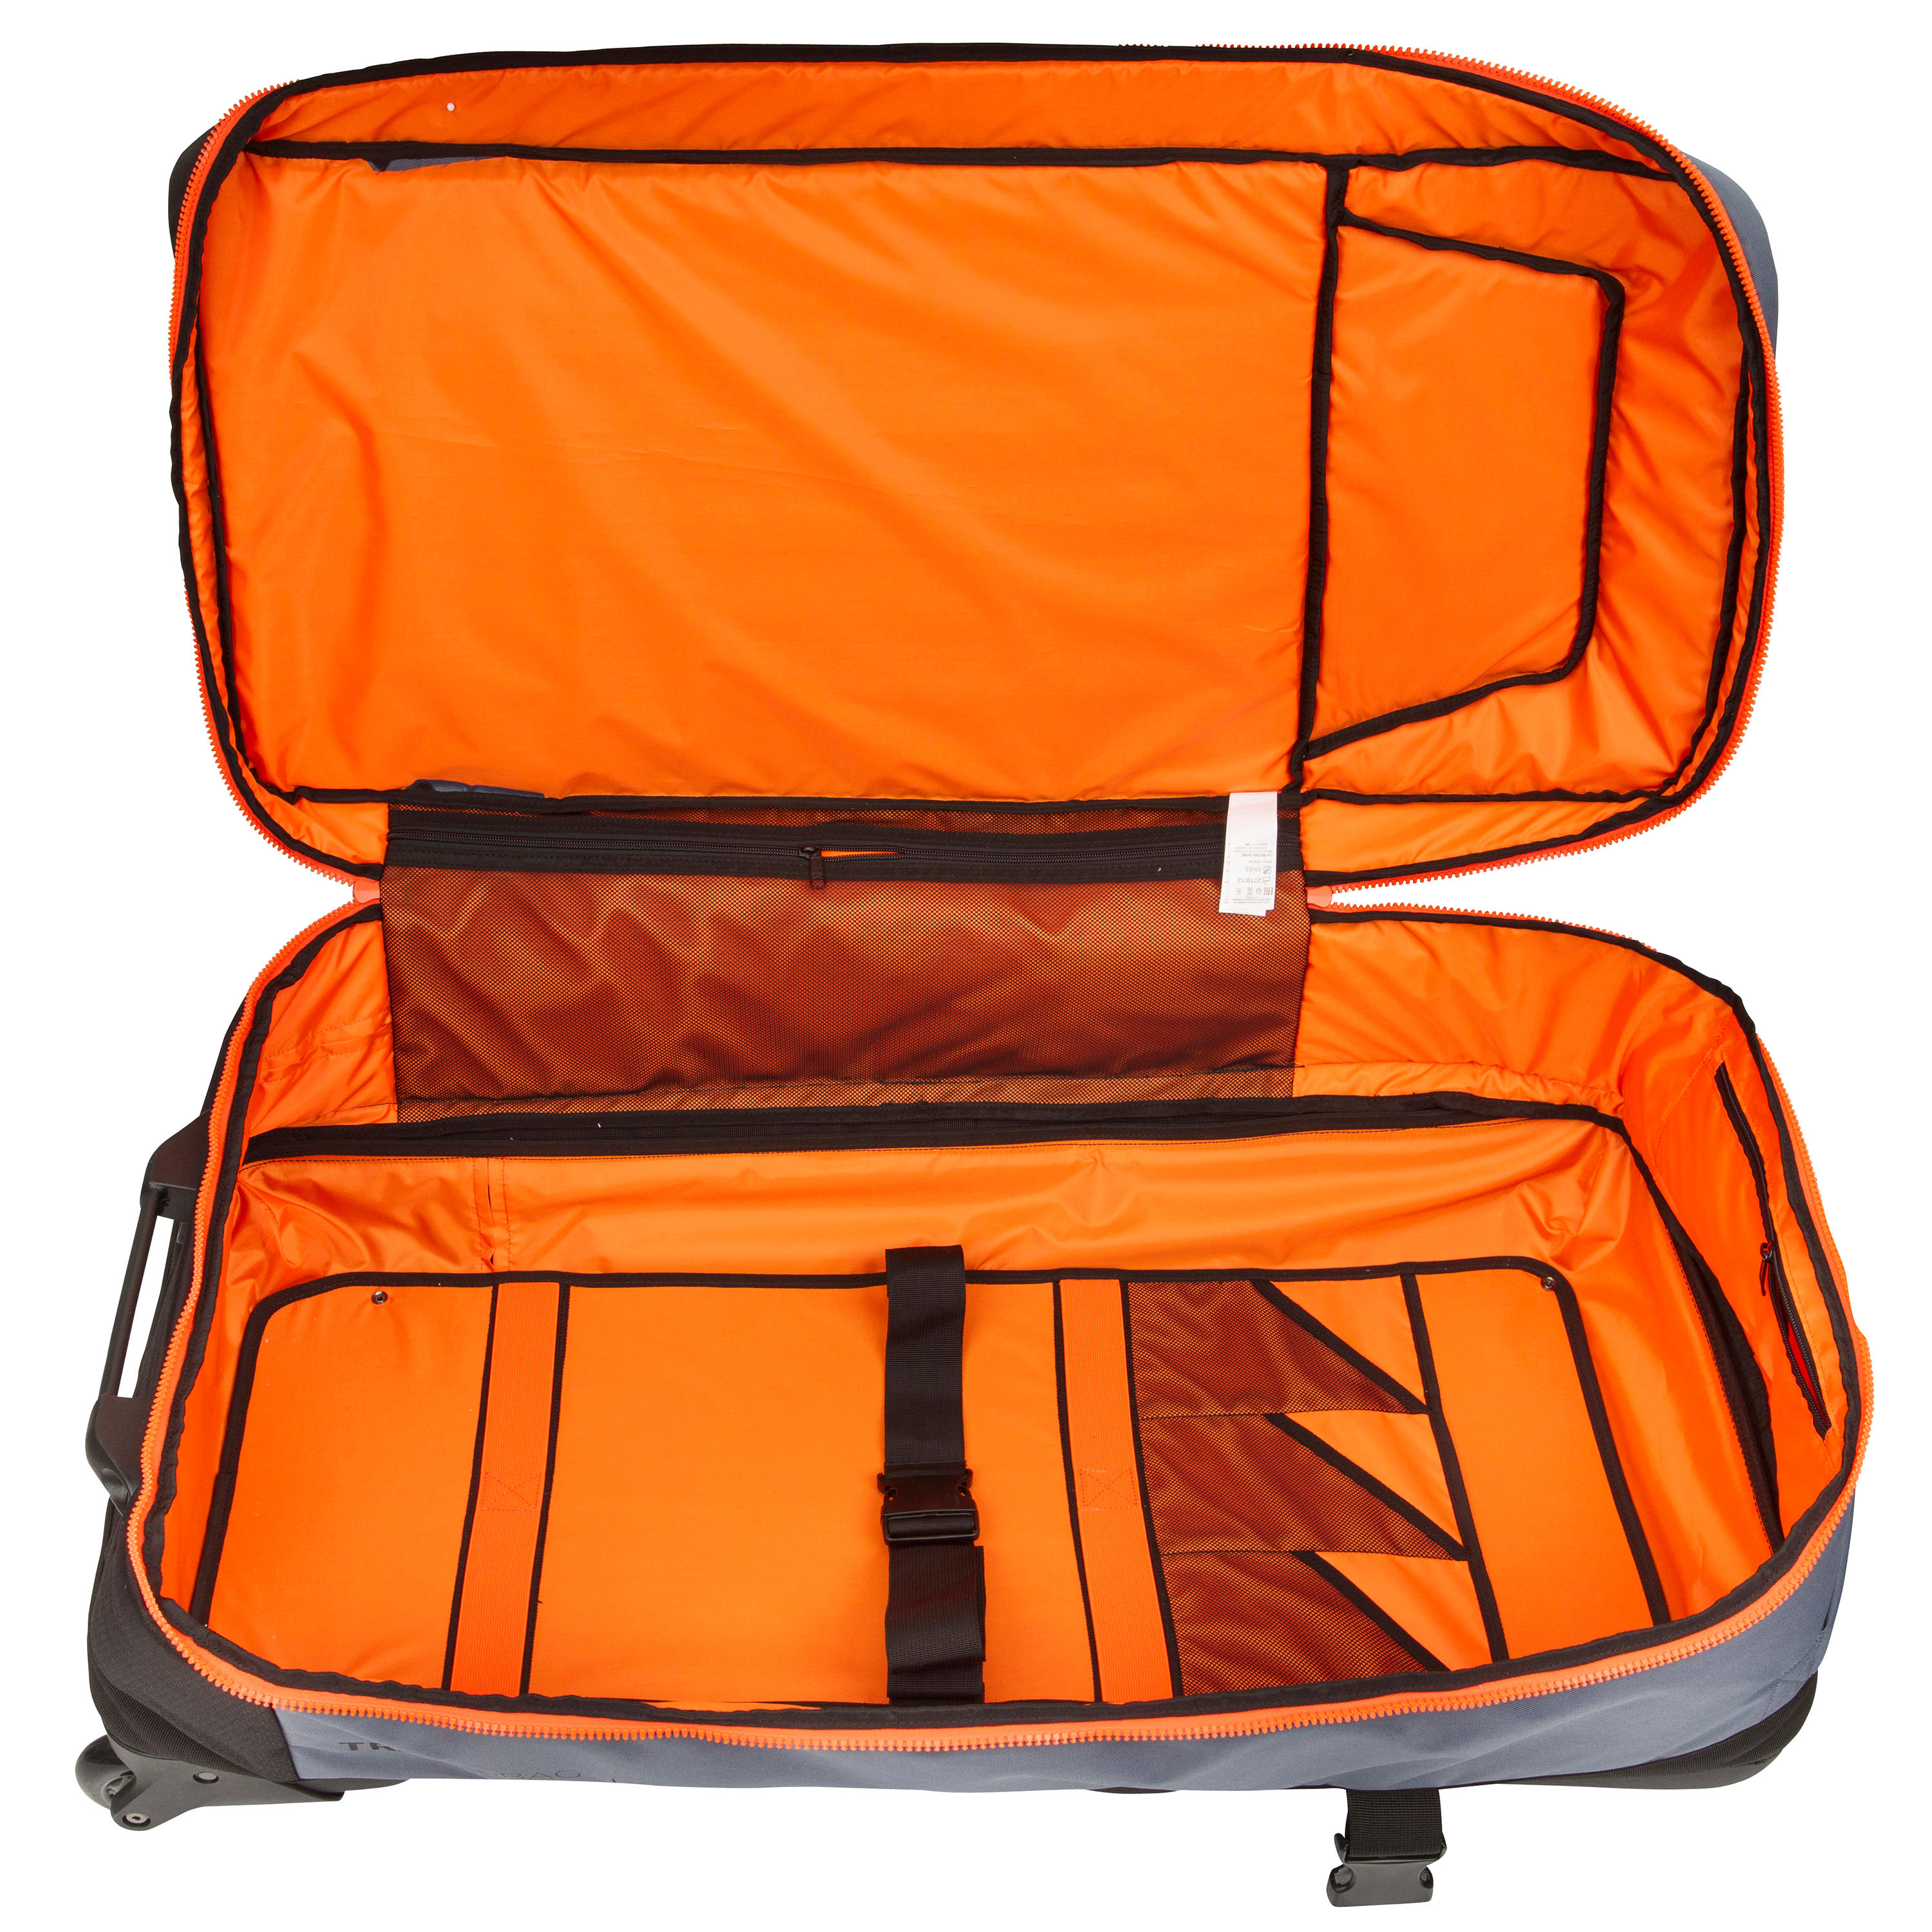 SHELLED TROLLEY TRAVEL BAG 140L FOR TRAVELLER WITH STAND UP PADDLE | STB500 9/19